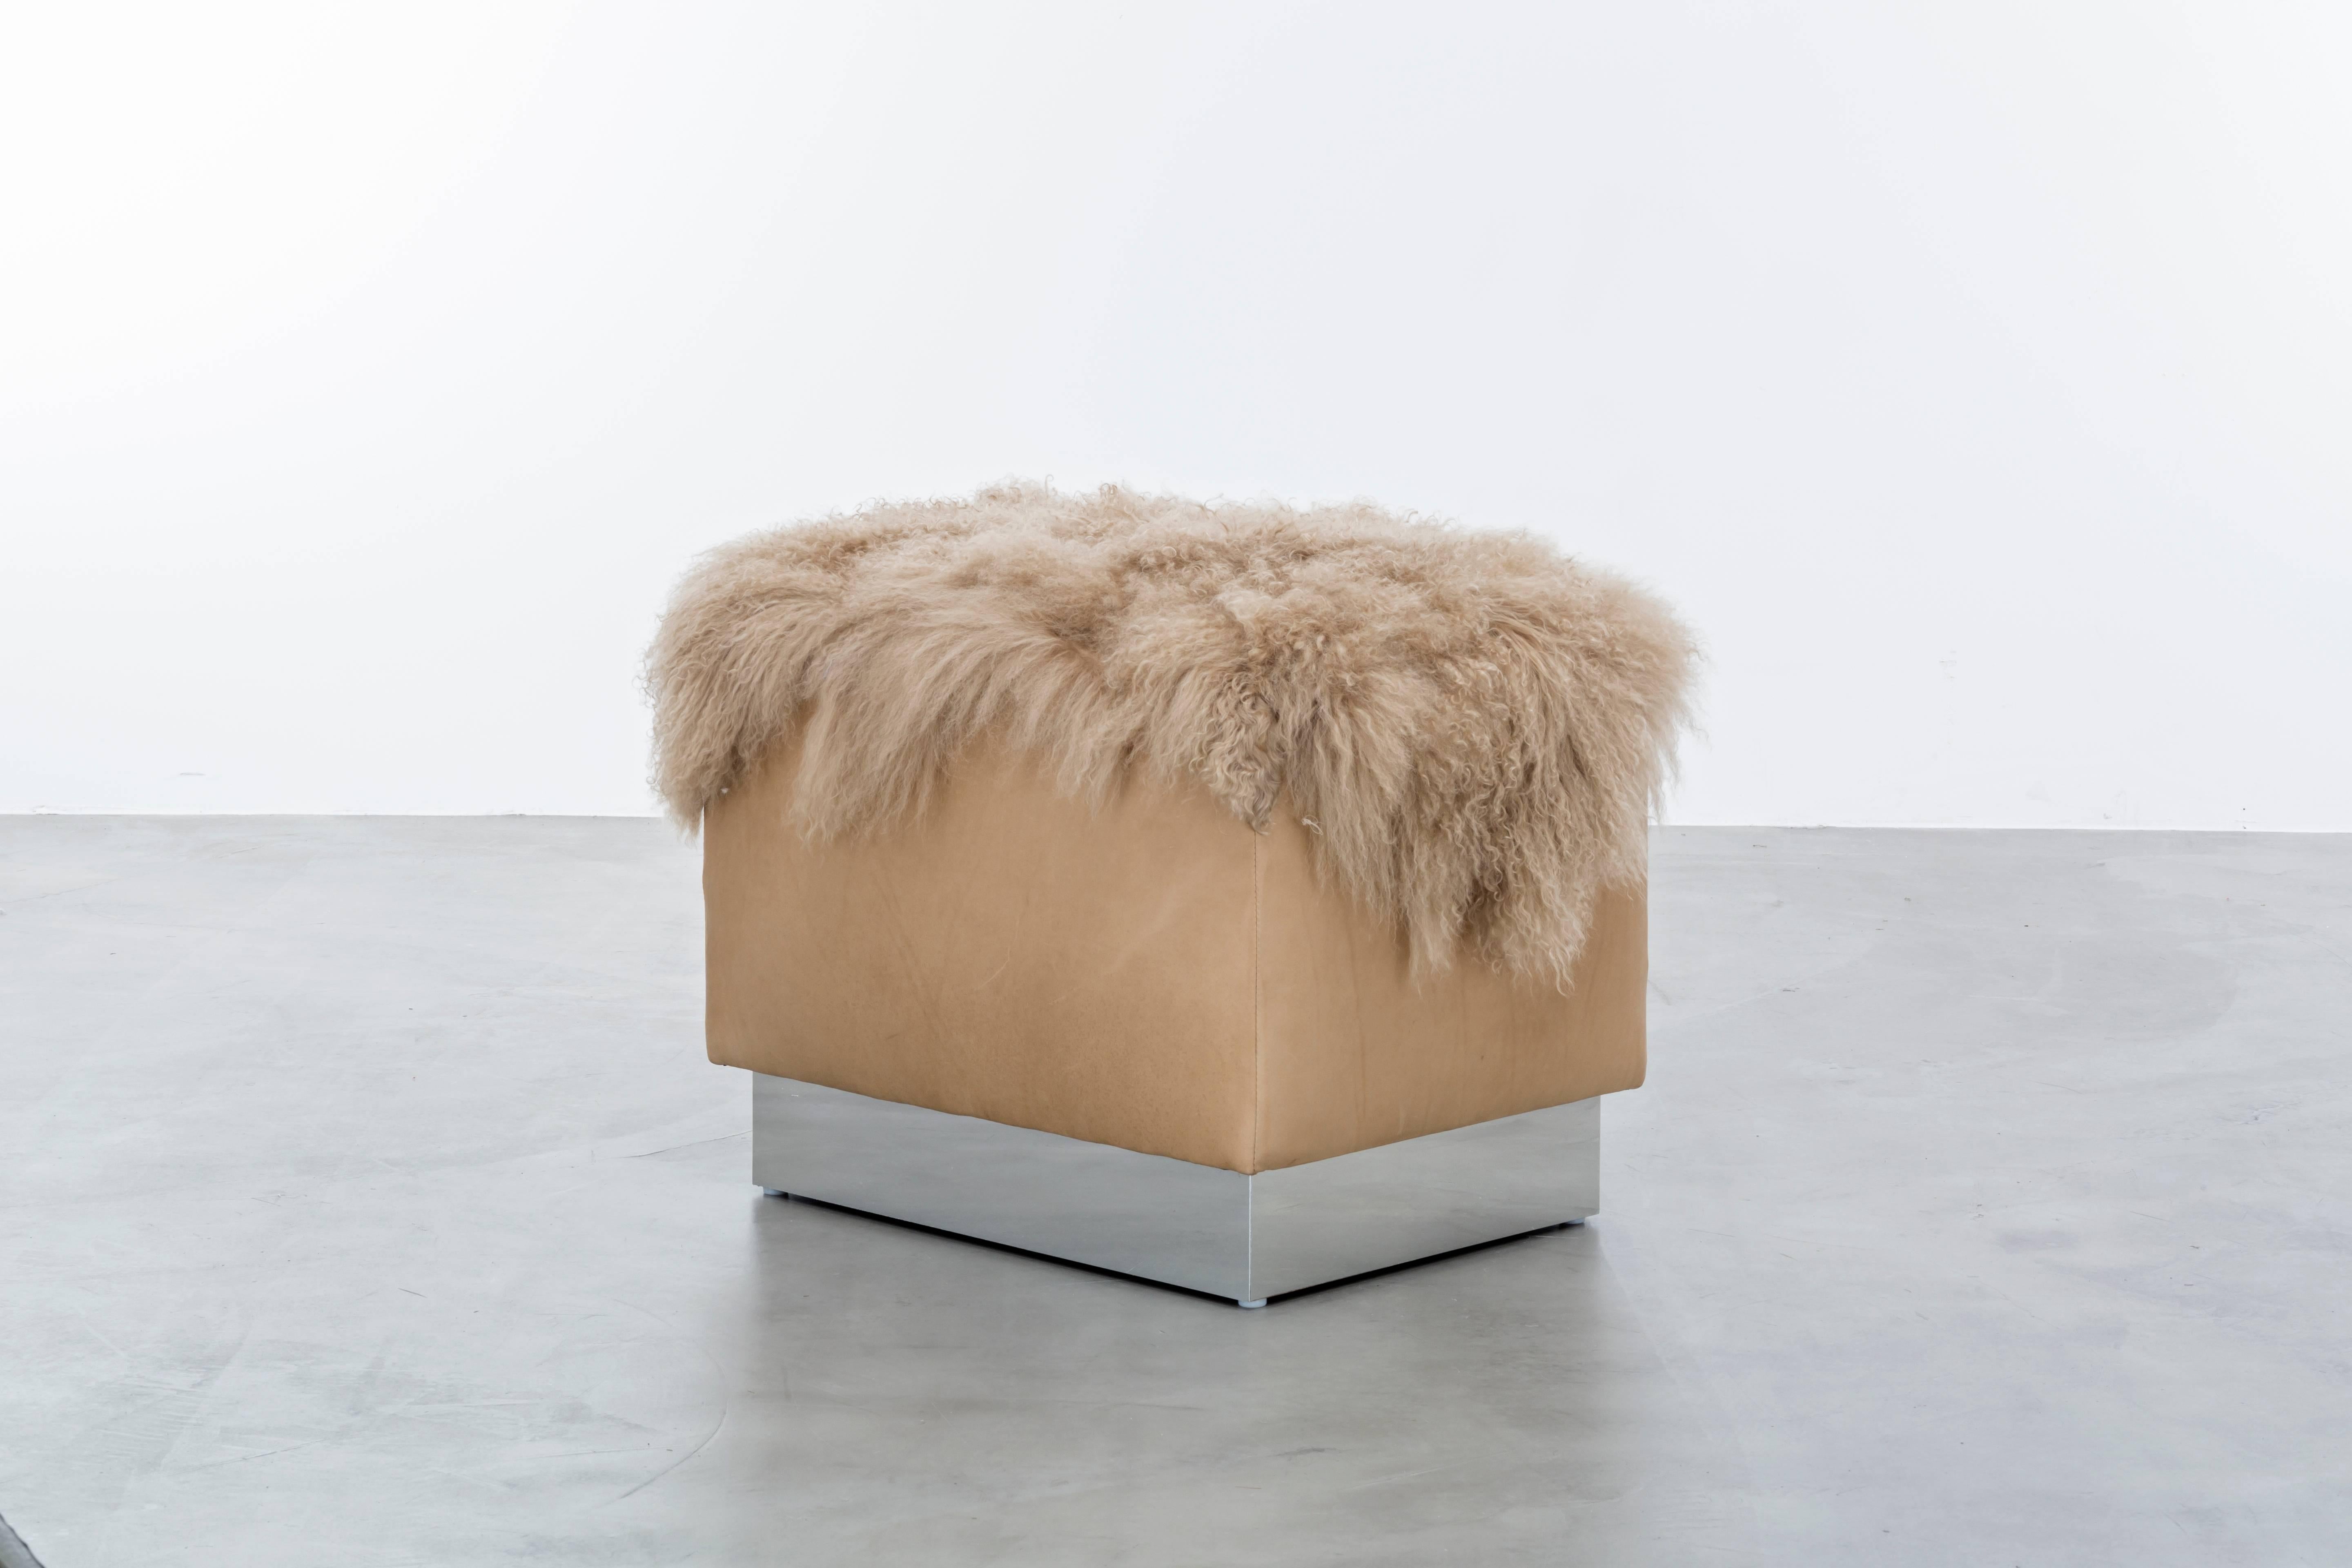 COSETTE OTTOMAN - Modern Leather Ottoman with Tibetan Mongolian Lamb Fur Pelt

The Cosette Ottoman is a one-of-a-kind piece that combines luxurious leather and Tibetan Mongolian lamb fur to create a stunning and comfortable seating option. Its